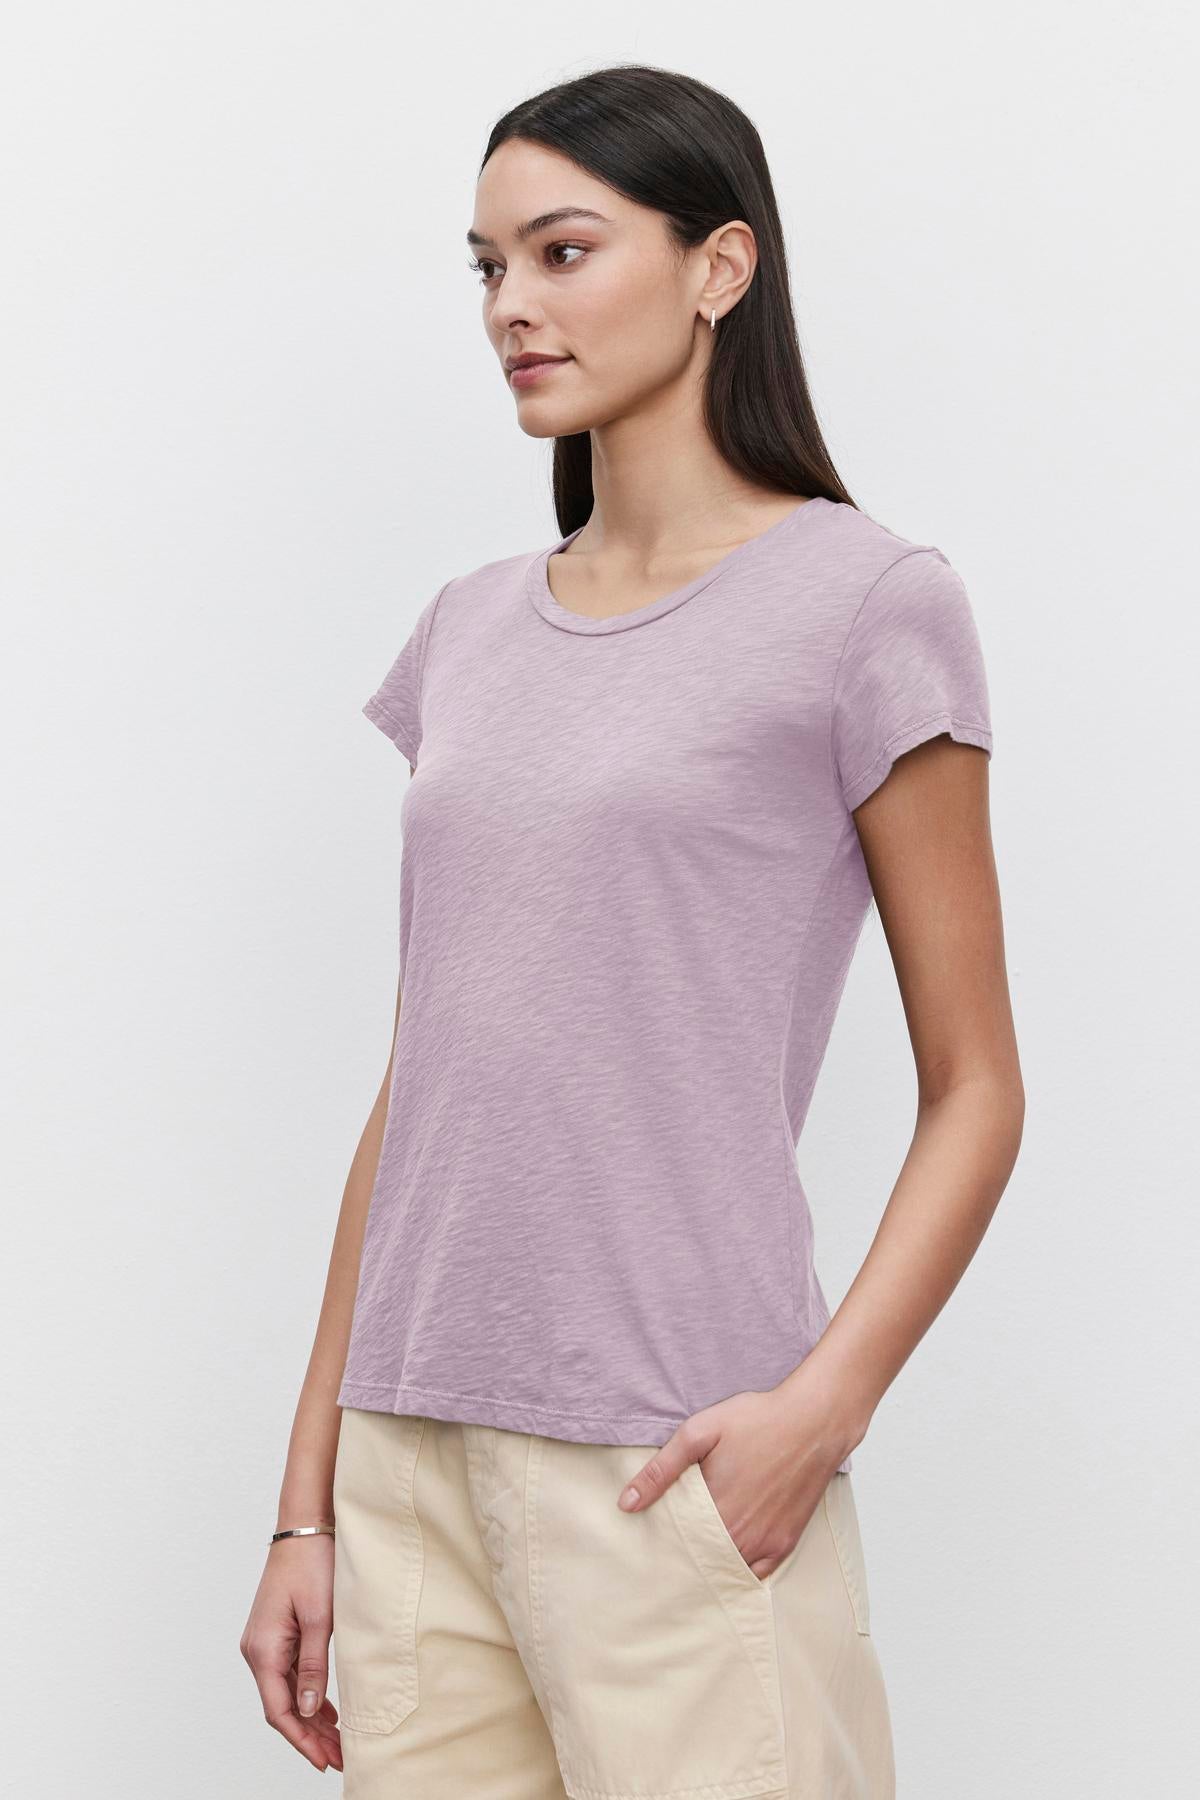   A person with long dark hair, wearing a short-sleeved lavender ODELIA TEE by Velvet by Graham & Spencer with a classic crew neckline and beige pants, stands against a plain white background. 